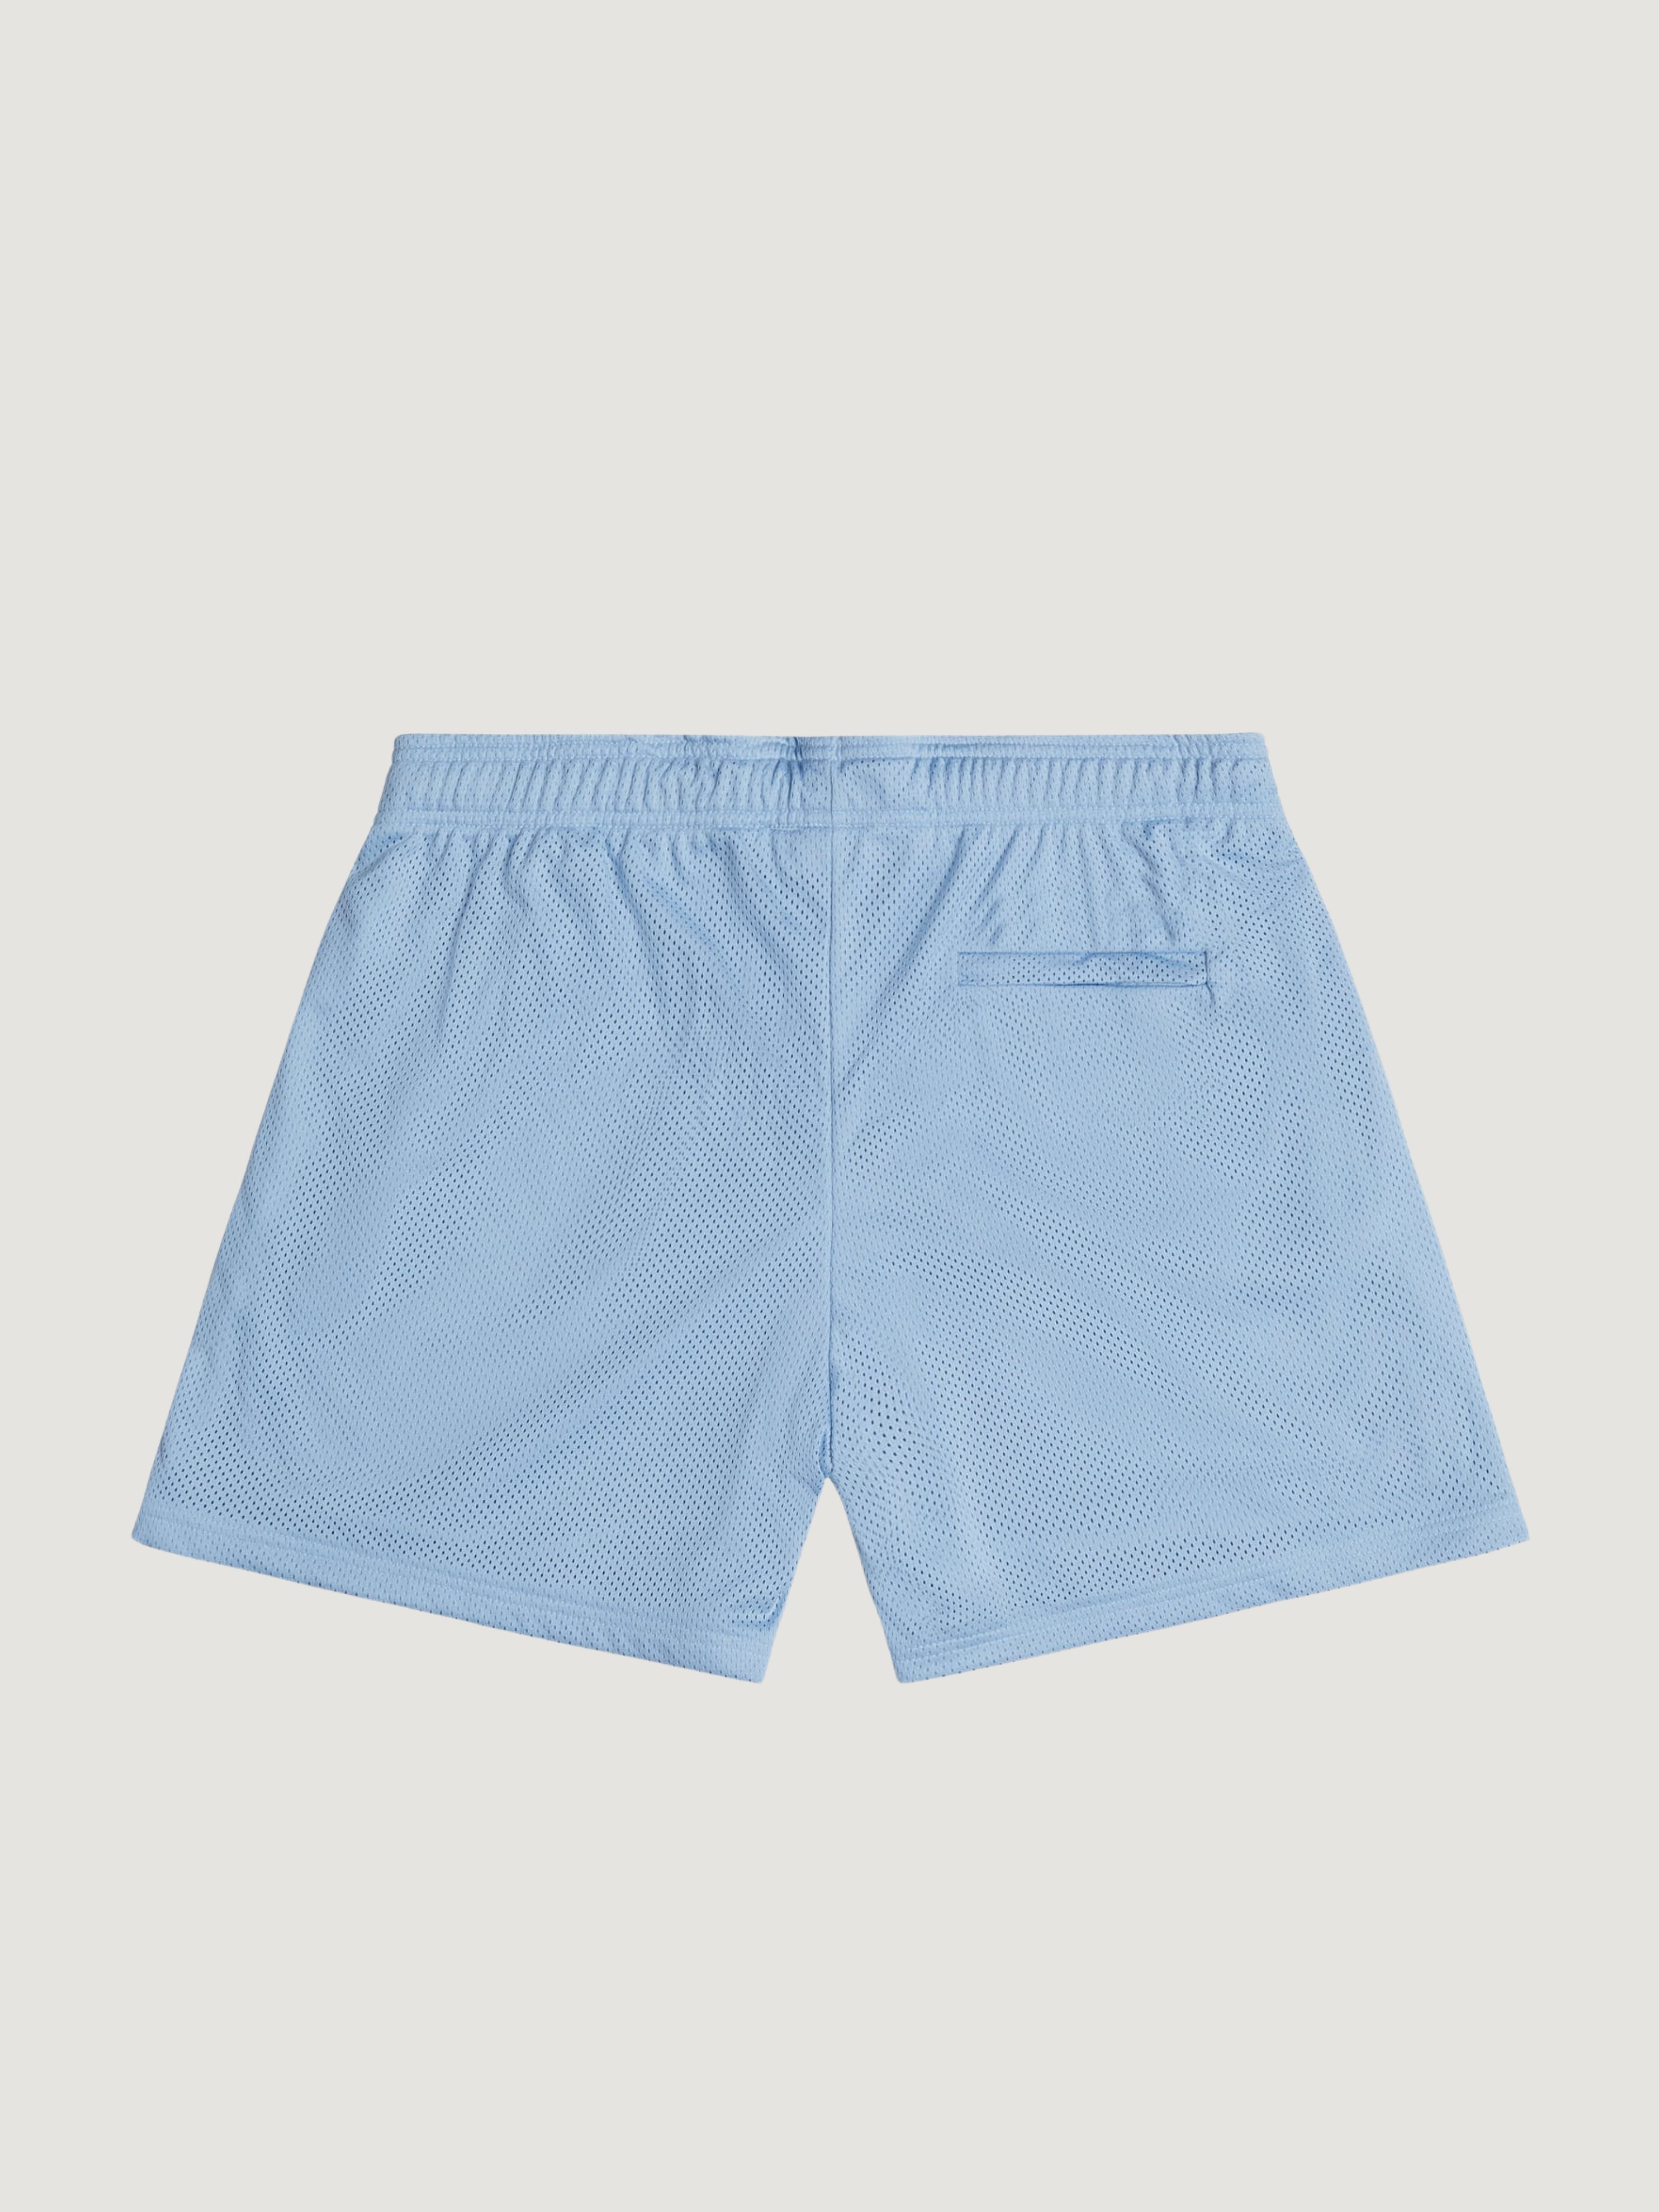 MESH SPORTS SHORTS BABY BLUE - ATTODE